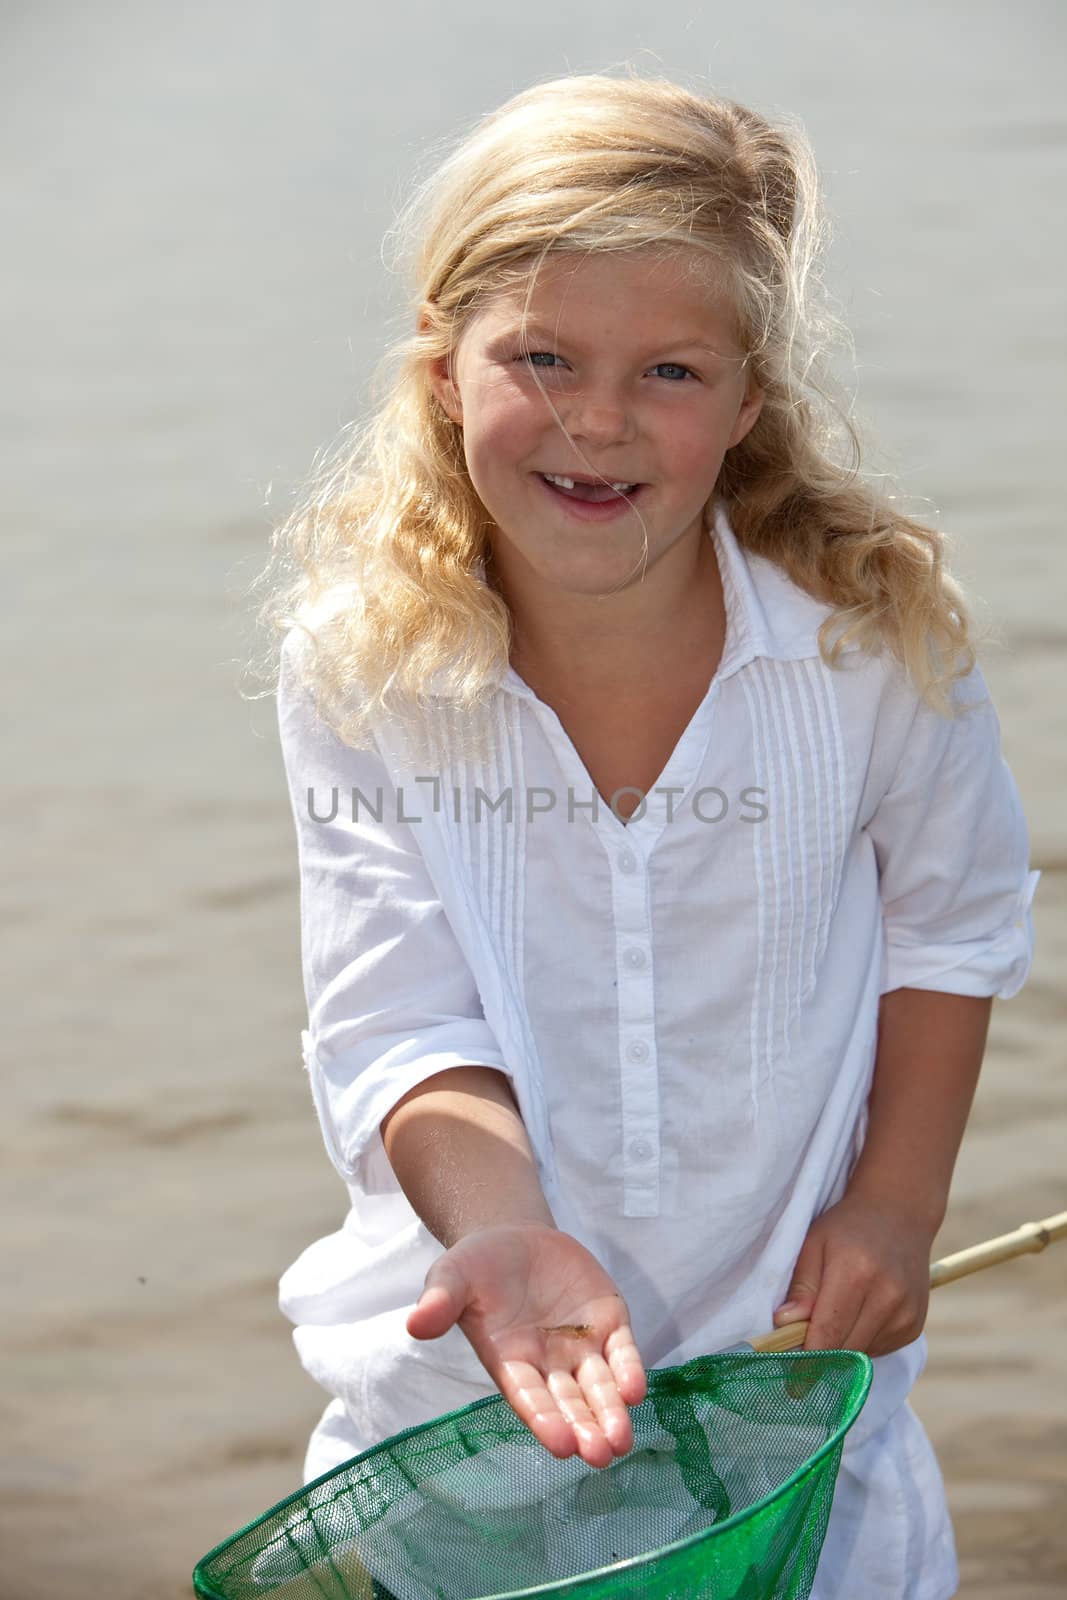 Young girl showing the shrimp she caught from the sea